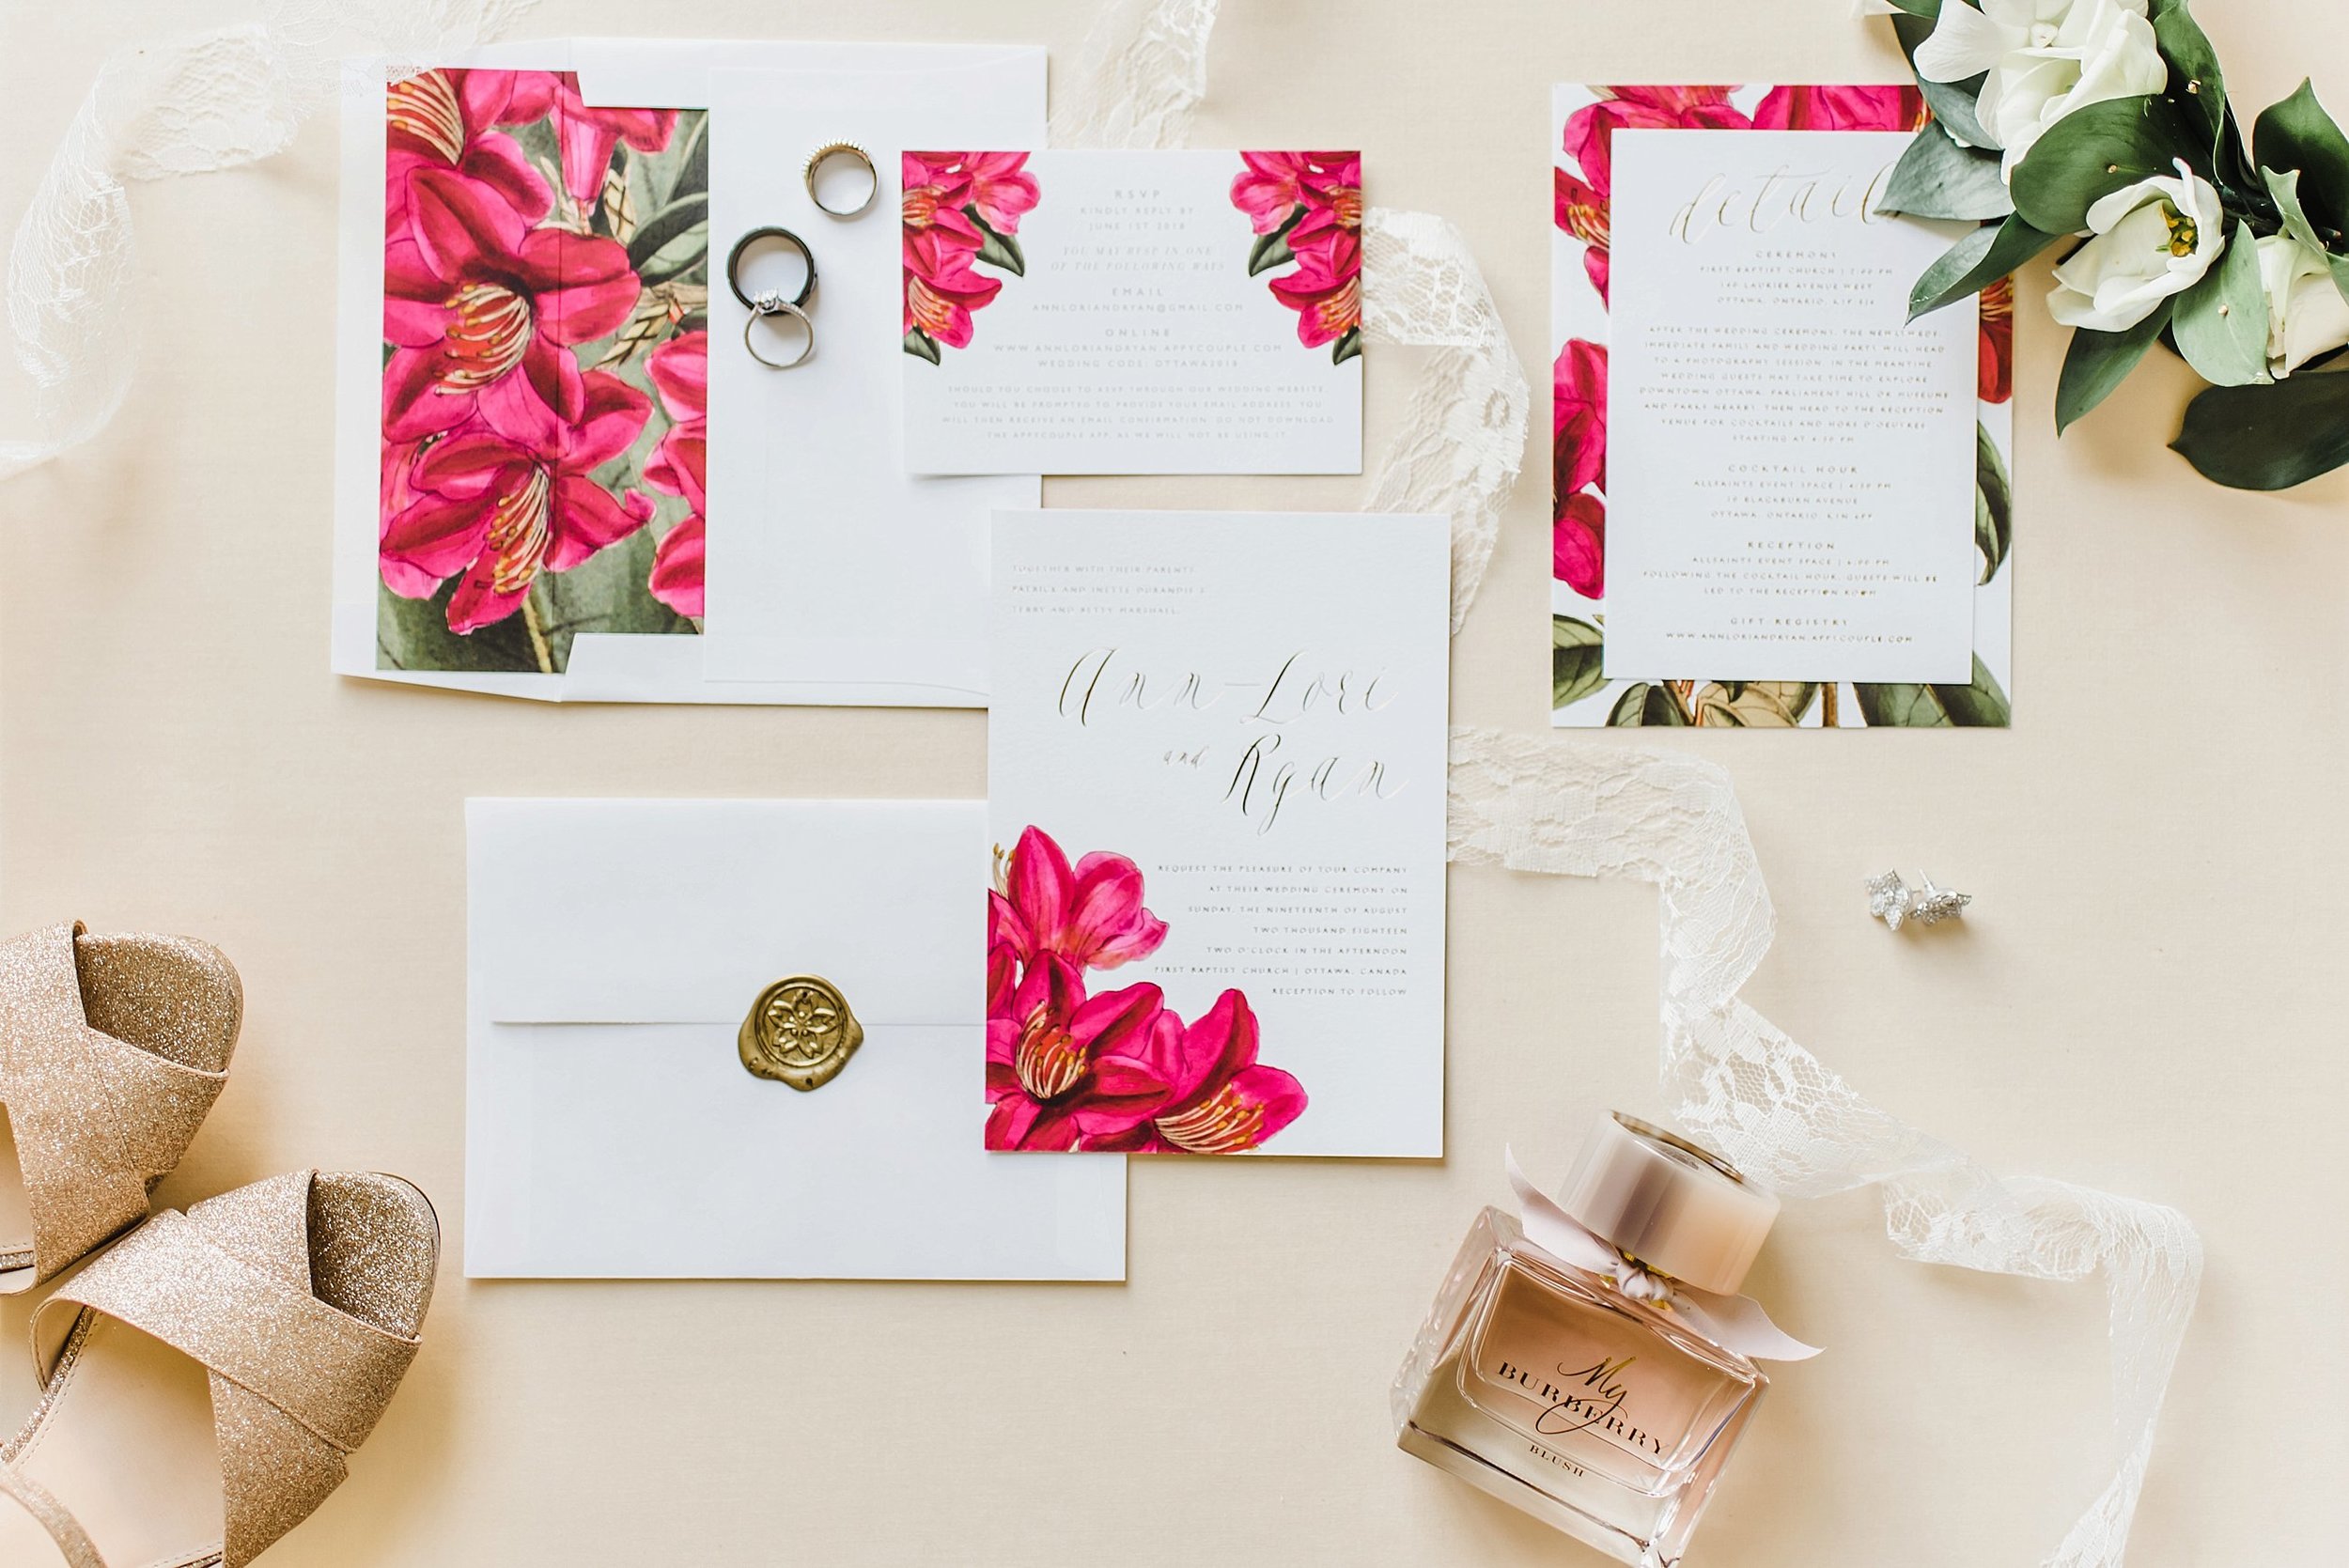  This invitation suite was unreal! By the talented Citrus Press Co. 